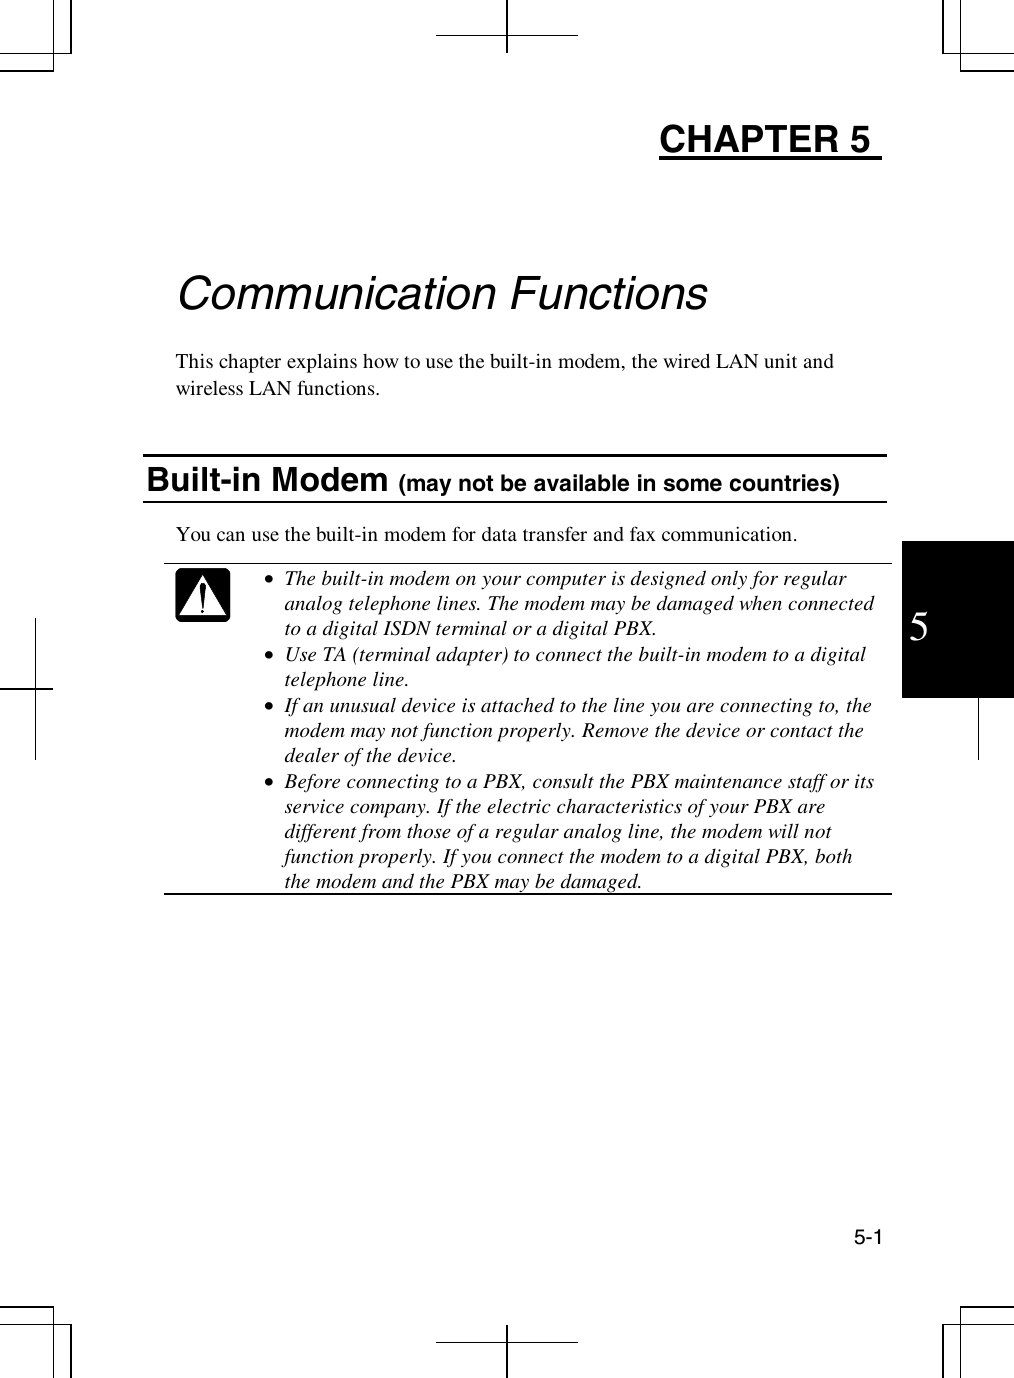 5-15CHAPTER 5Communication FunctionsThis chapter explains how to use the built-in modem, the wired LAN unit andwireless LAN functions.Built-in Modem (may not be available in some countries)You can use the built-in modem for data transfer and fax communication.•  The built-in modem on your computer is designed only for regularanalog telephone lines. The modem may be damaged when connectedto a digital ISDN terminal or a digital PBX.•  Use TA (terminal adapter) to connect the built-in modem to a digitaltelephone line.•  If an unusual device is attached to the line you are connecting to, themodem may not function properly. Remove the device or contact thedealer of the device.•  Before connecting to a PBX, consult the PBX maintenance staff or itsservice company. If the electric characteristics of your PBX aredifferent from those of a regular analog line, the modem will notfunction properly. If you connect the modem to a digital PBX, boththe modem and the PBX may be damaged.